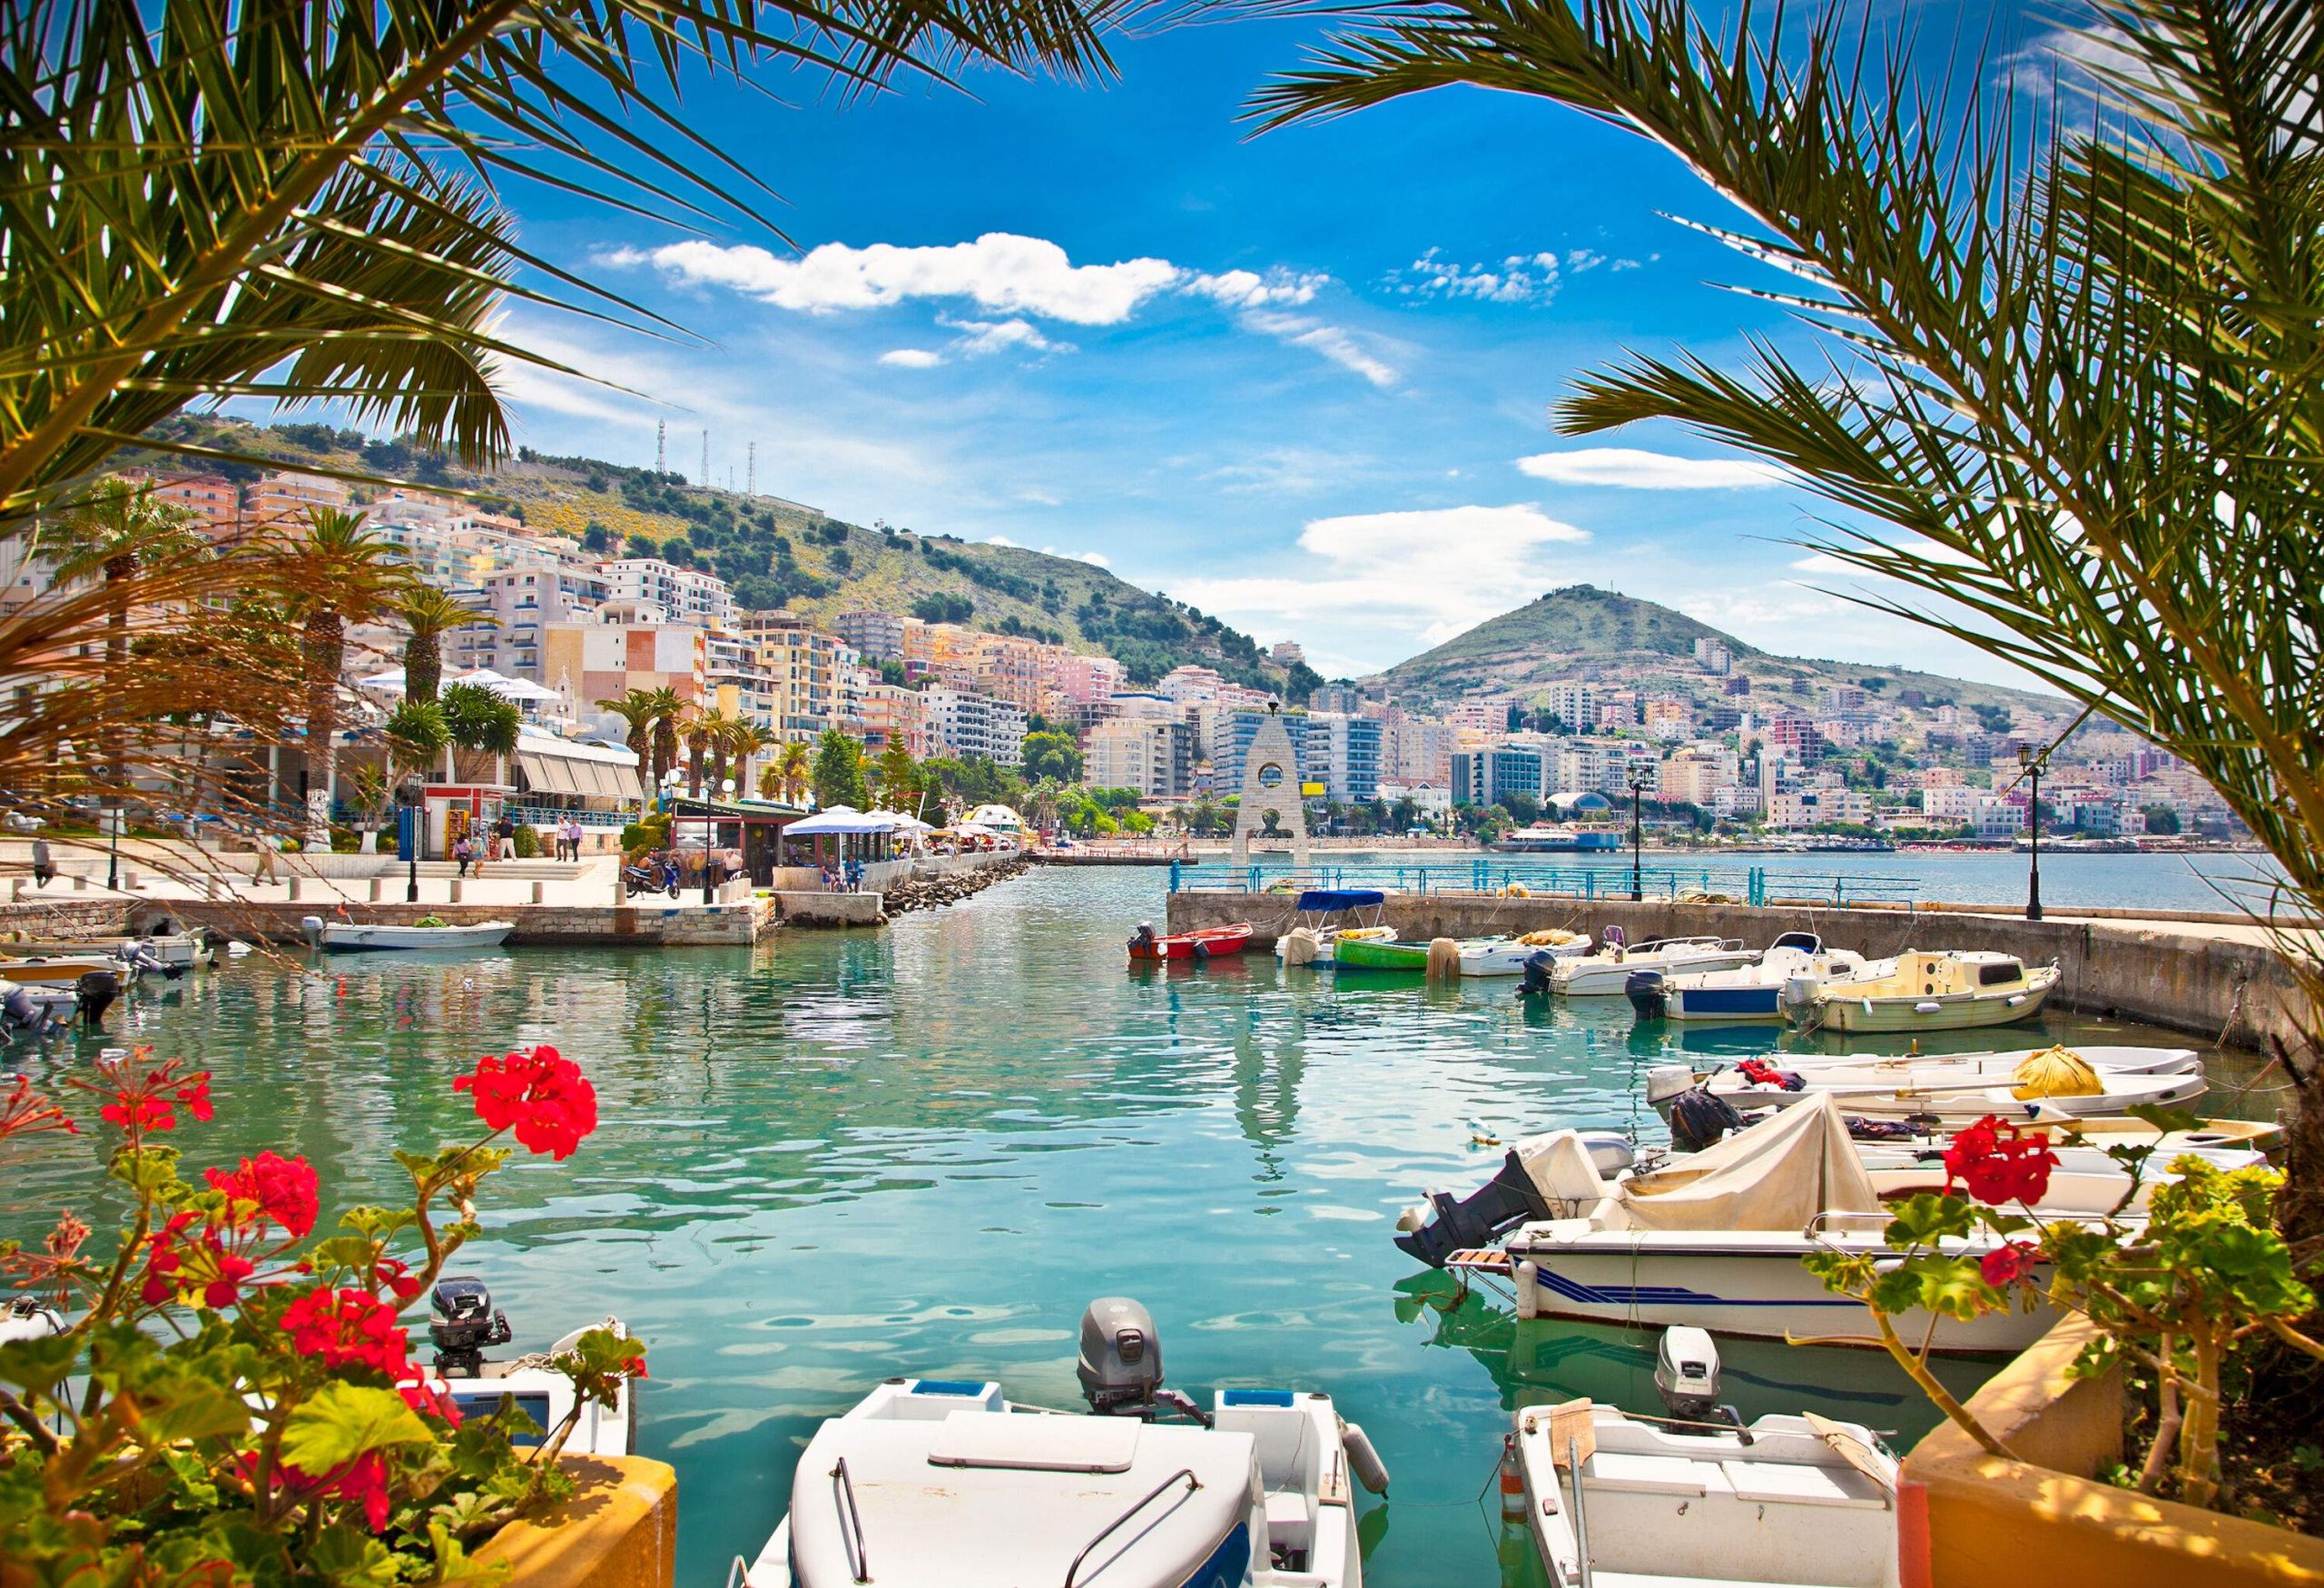 A coastal town with modern buildings on the foot of lush hills by the sea with moored boats.